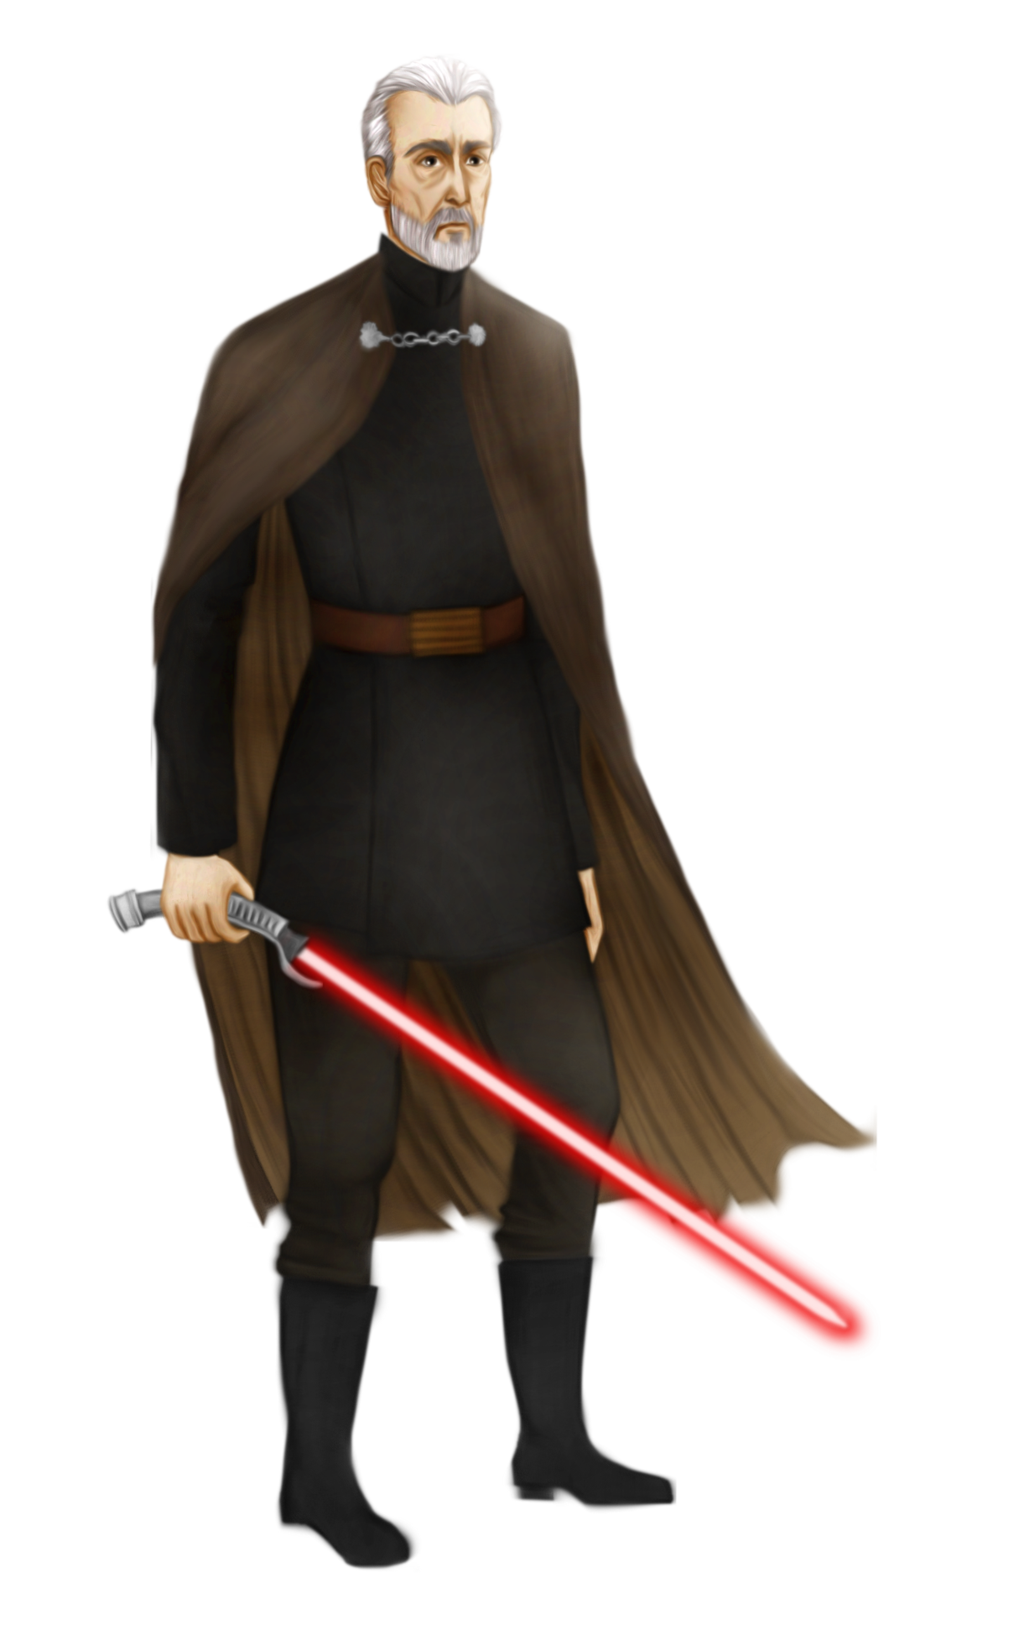 Count Dooku by Hed ush on